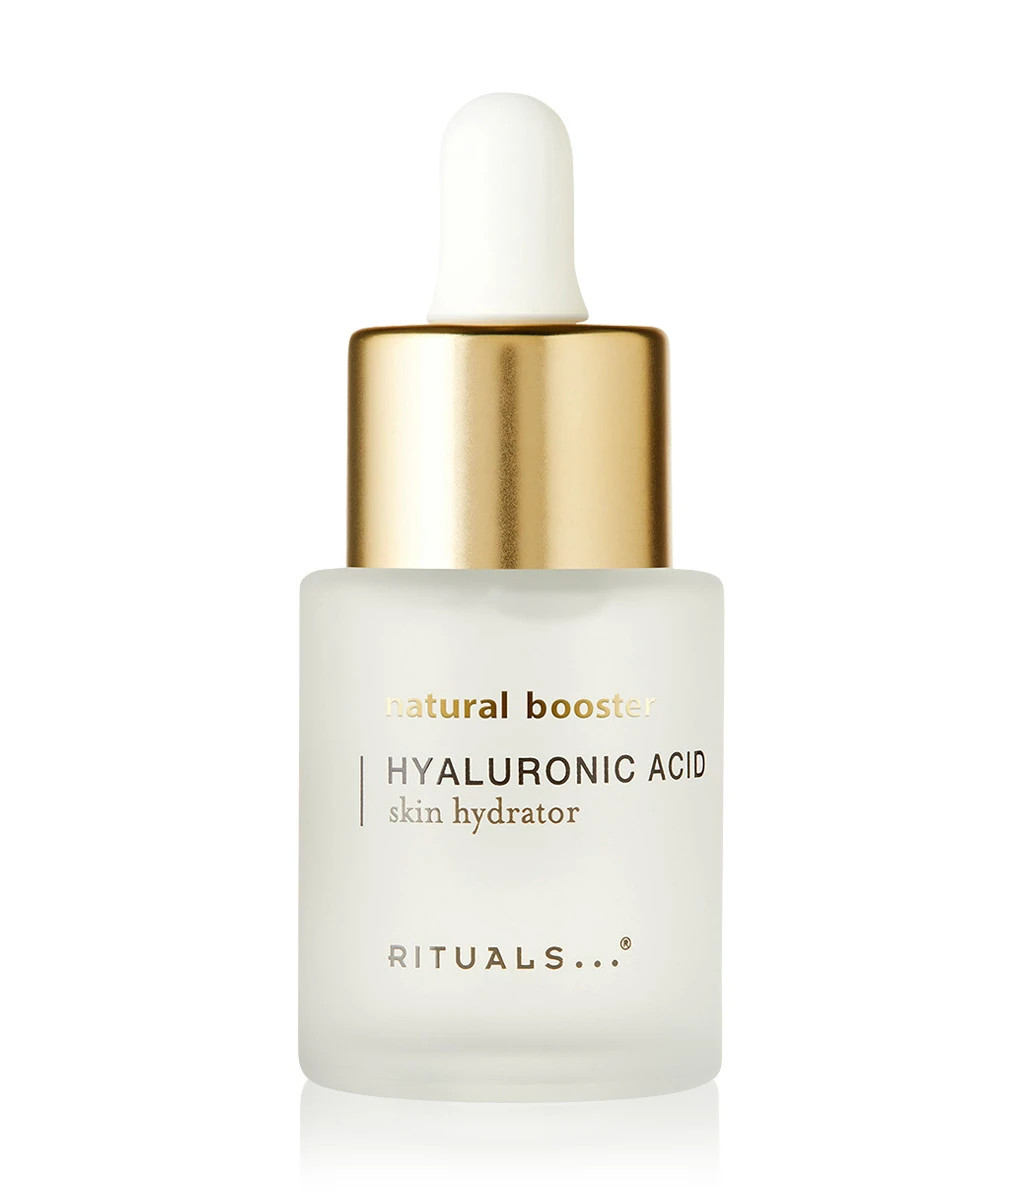 Rituals Přírodní hyaluronový booster The Rituals of Namaste (Natural Acid Hyaluronic Boost) 20 ml